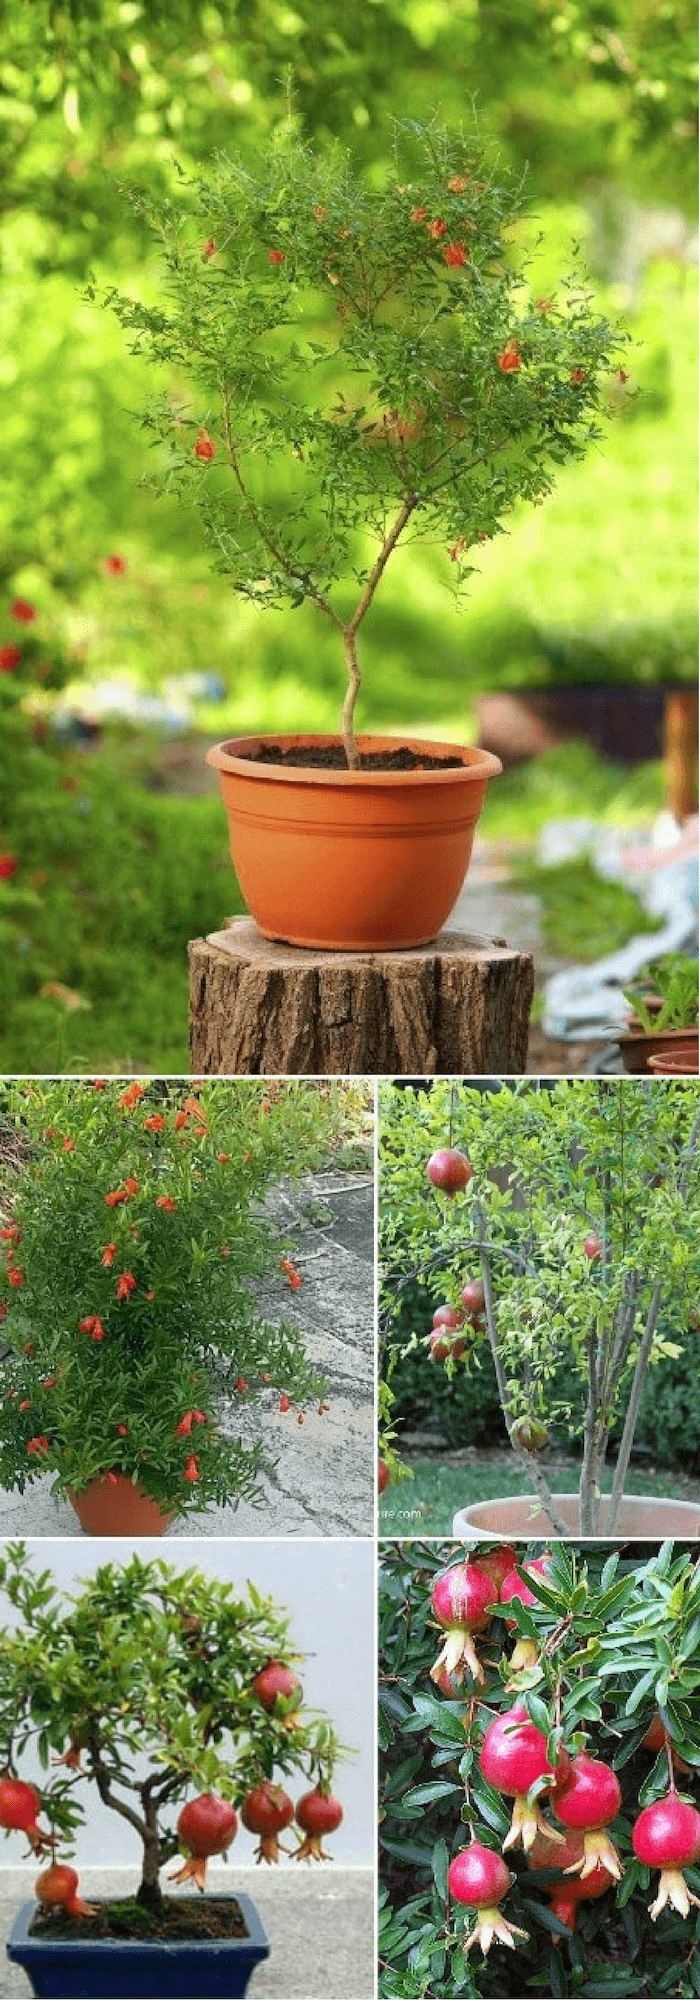 Growing Pomegranate tree in pots